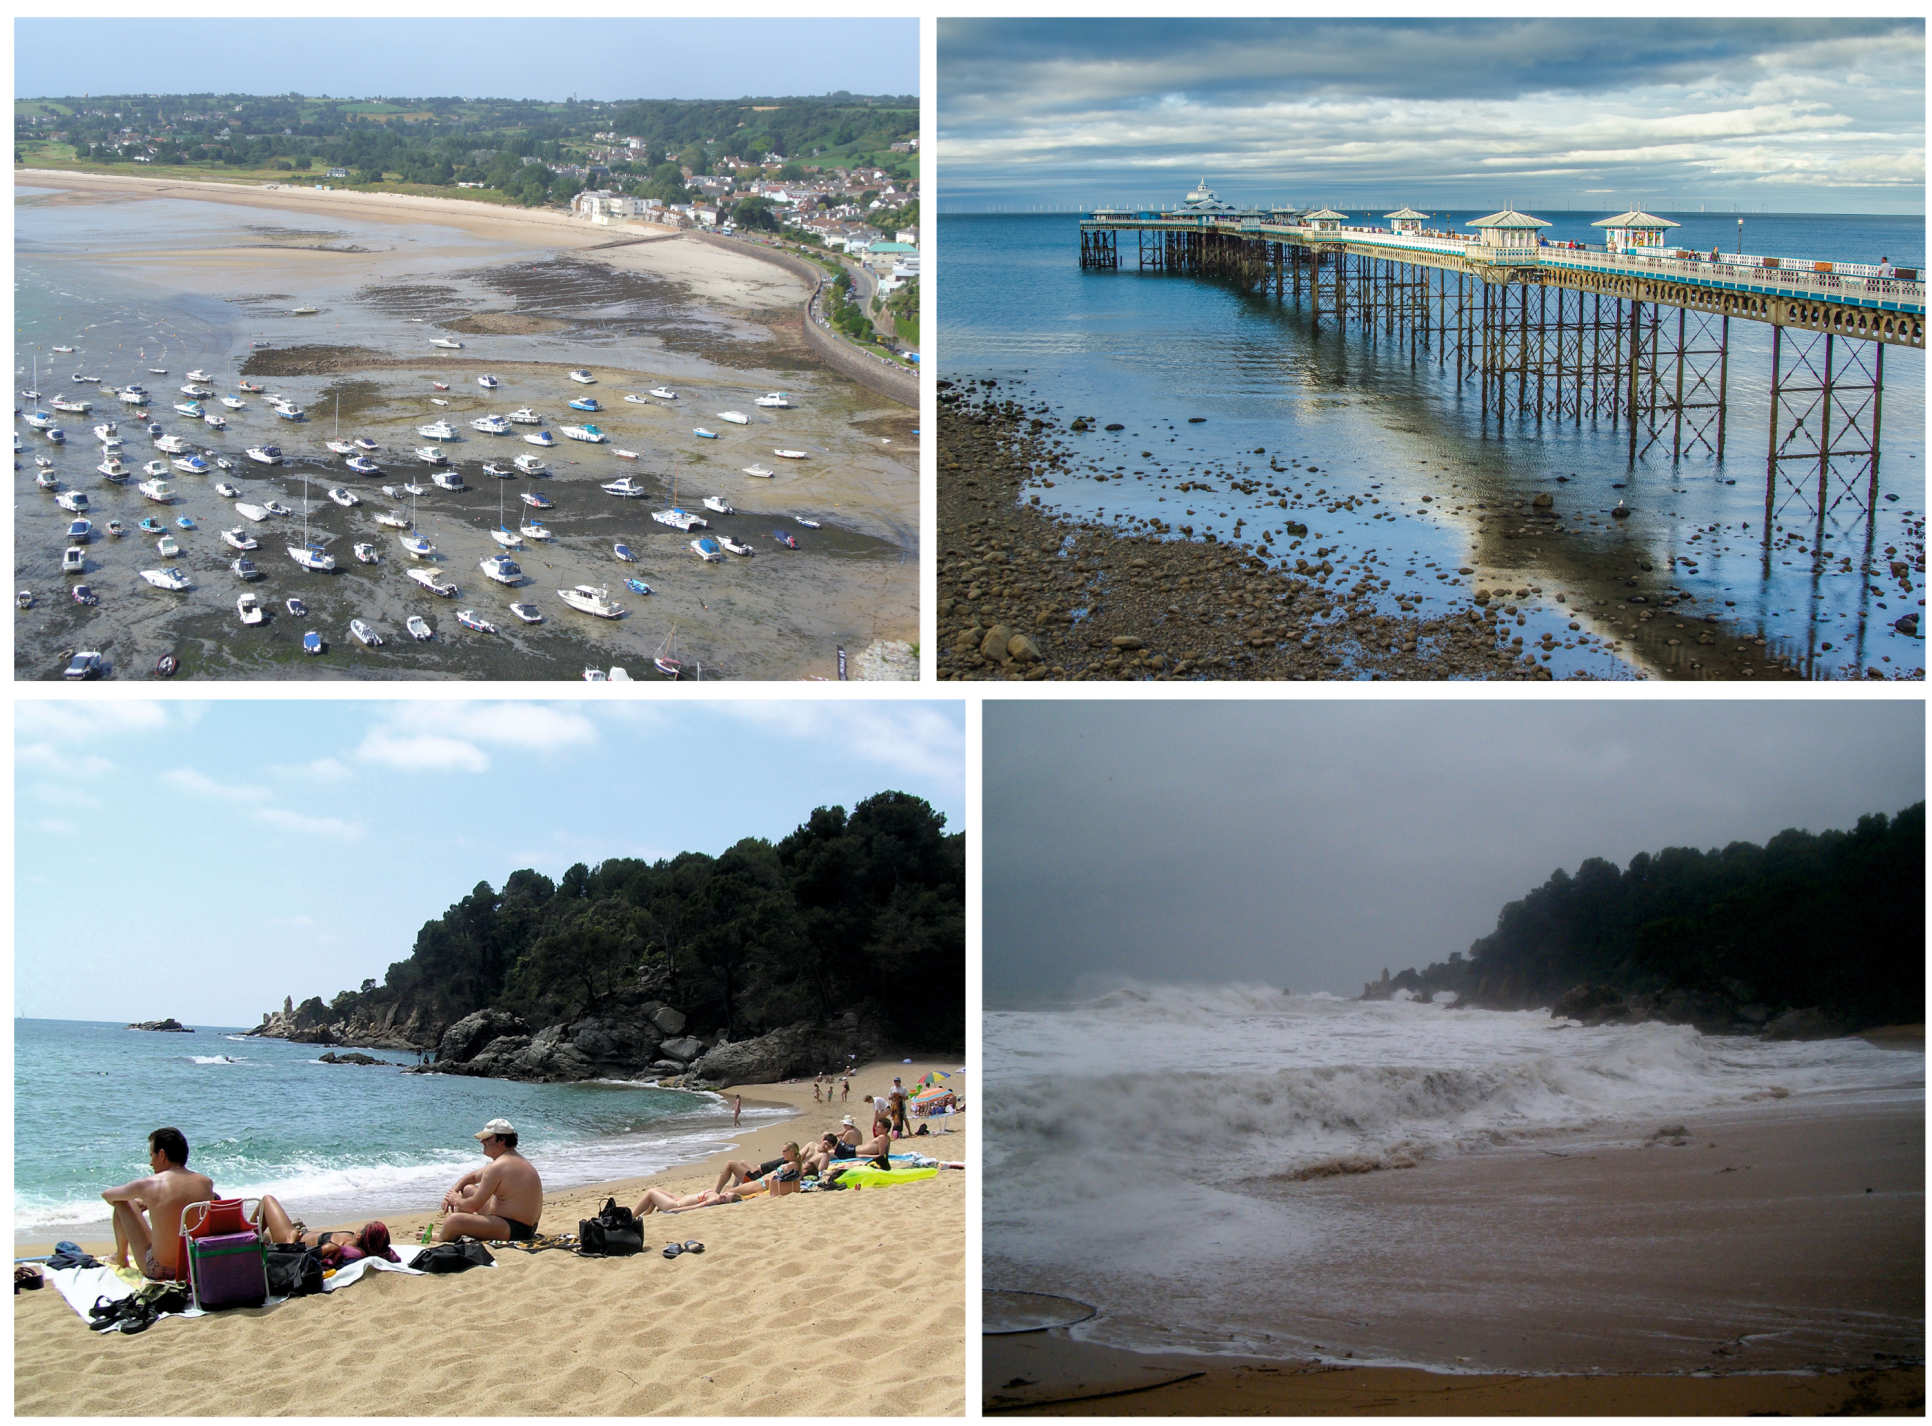 [Top-left] Gorey harbour, Jersey at low tide, [Top-left] Example of a Coastal Structure: Llandudno Pier, Wales , [Bottom] A recreational beach in the Mediterranean Sea in calm and storm conditions 